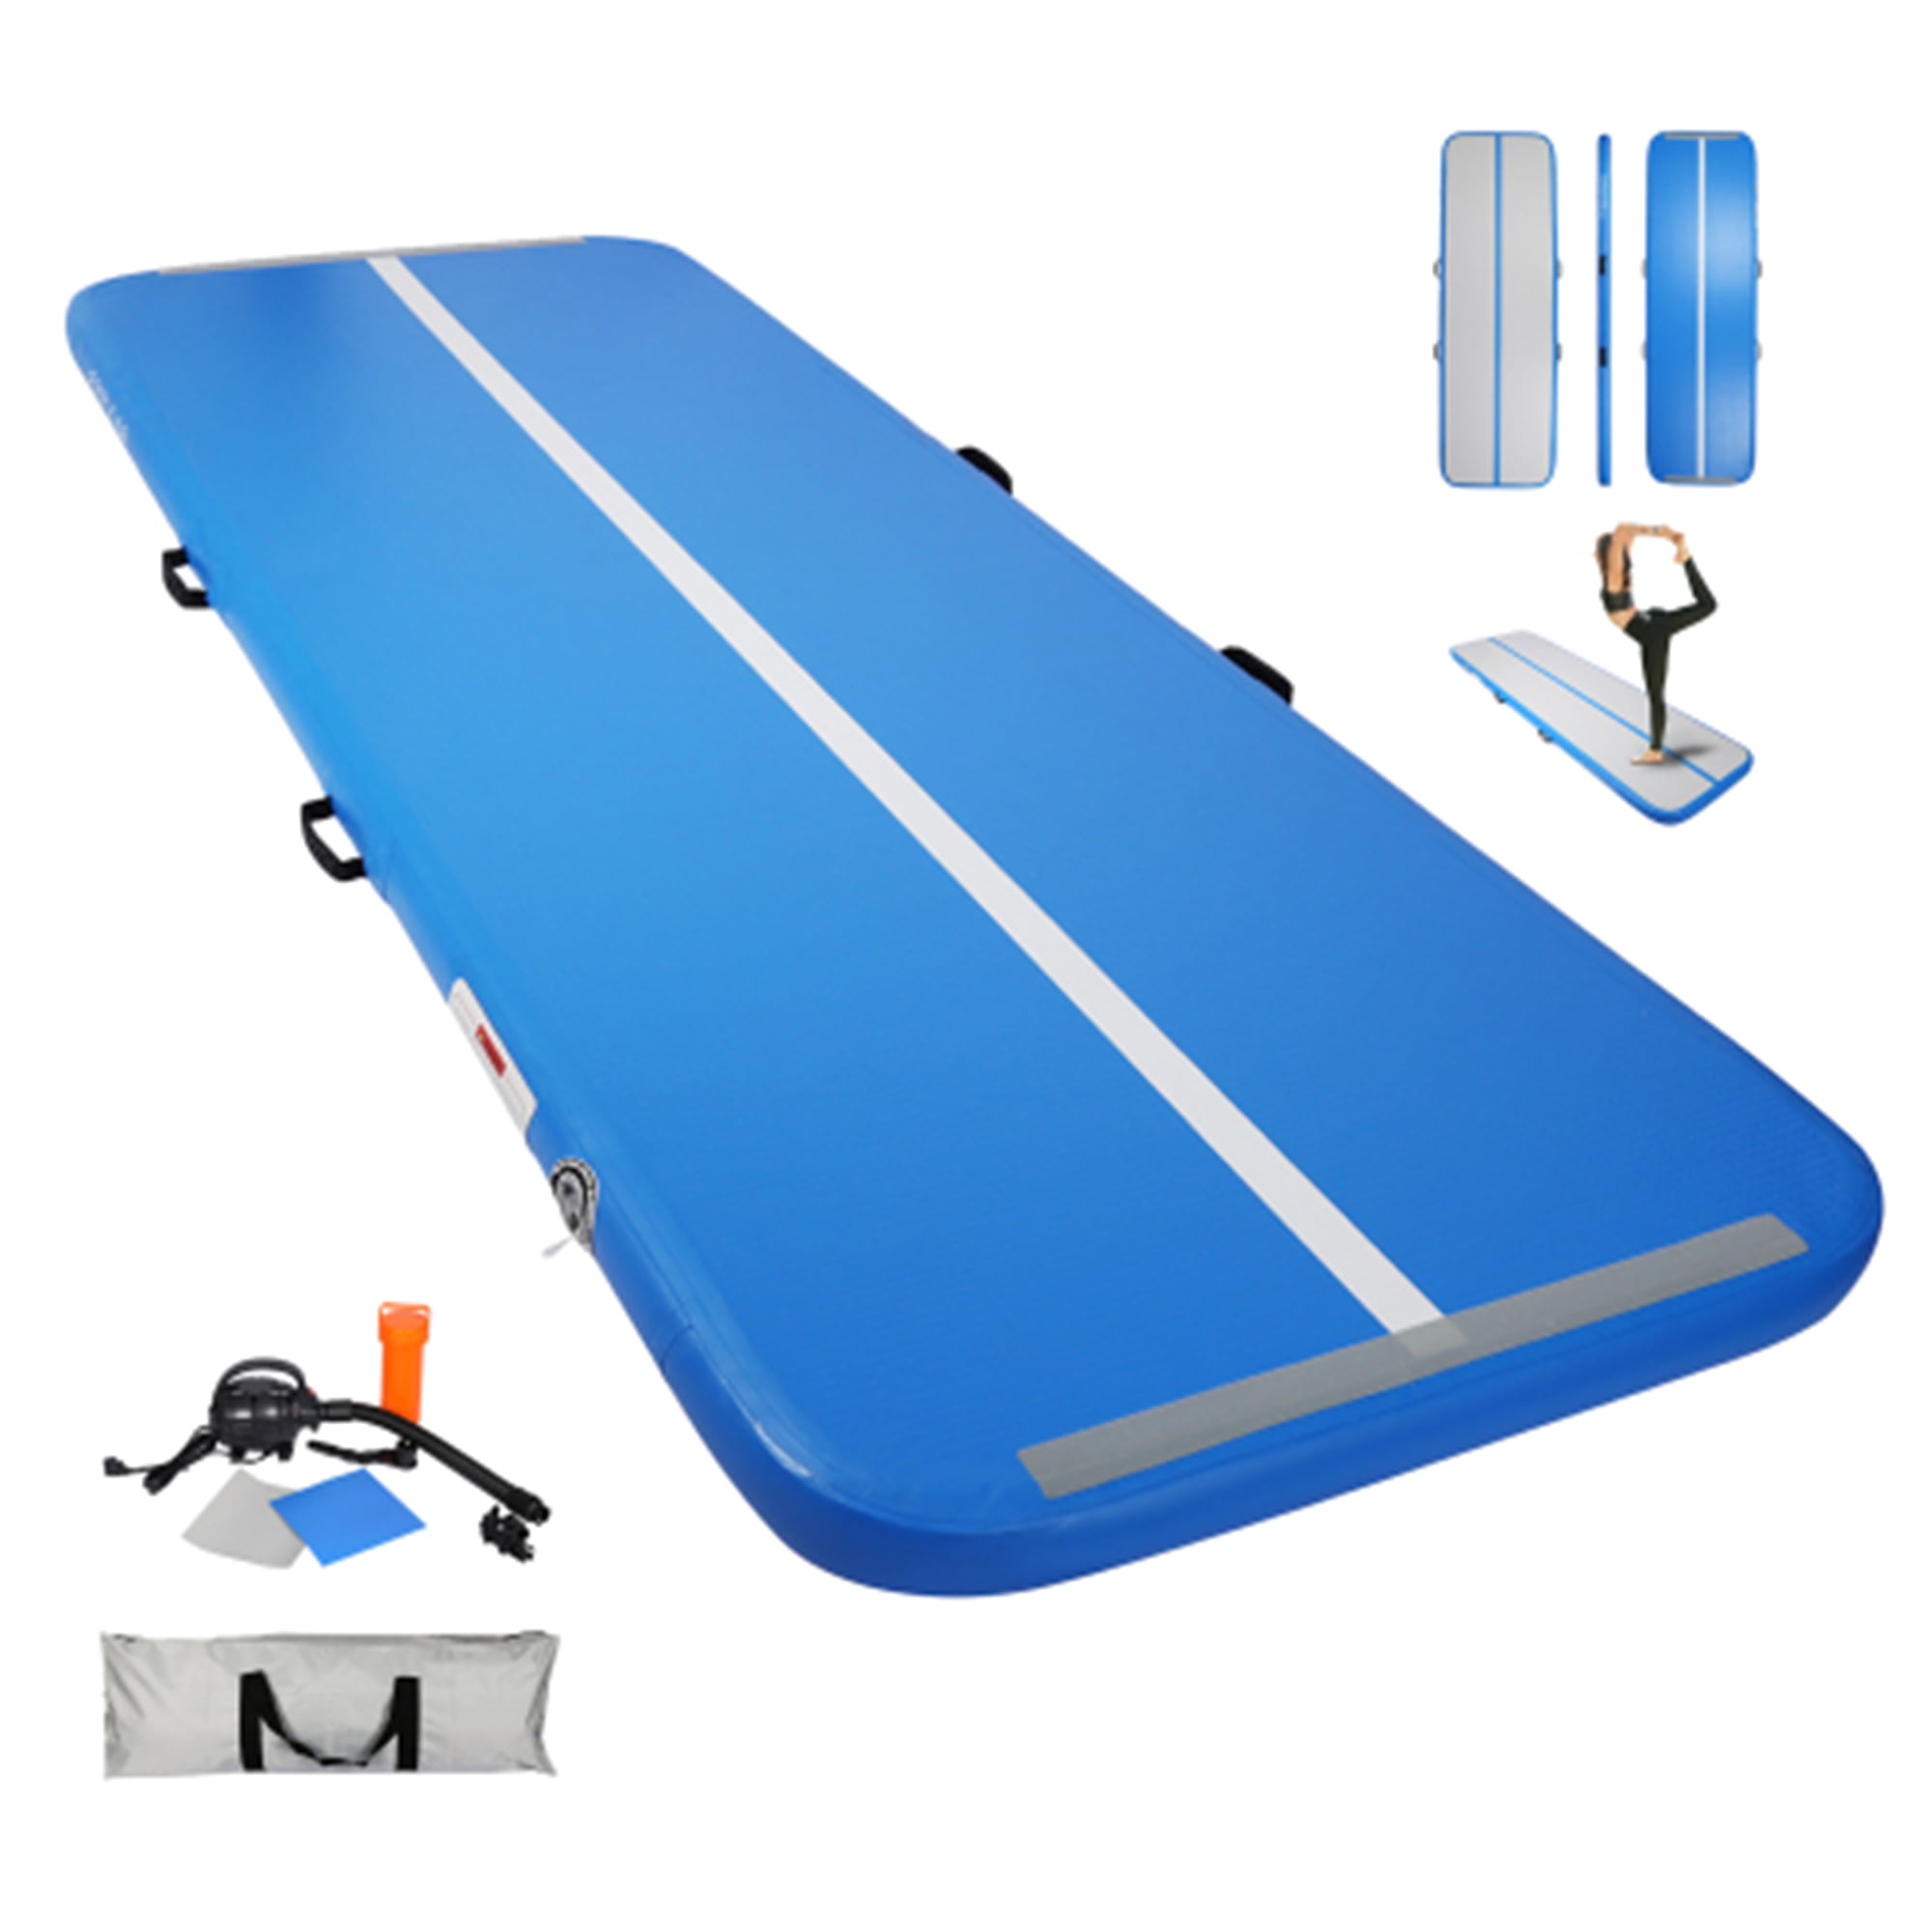 GARTIO 10FT/13FT Air Track Inflatable Gymnastics Tumbling Mat Training Mats 4 inches Thickness Airtrack Mats with Carry Bag Electric Air Pump for Home Use/Training/Cheerleading/Yoga/Water